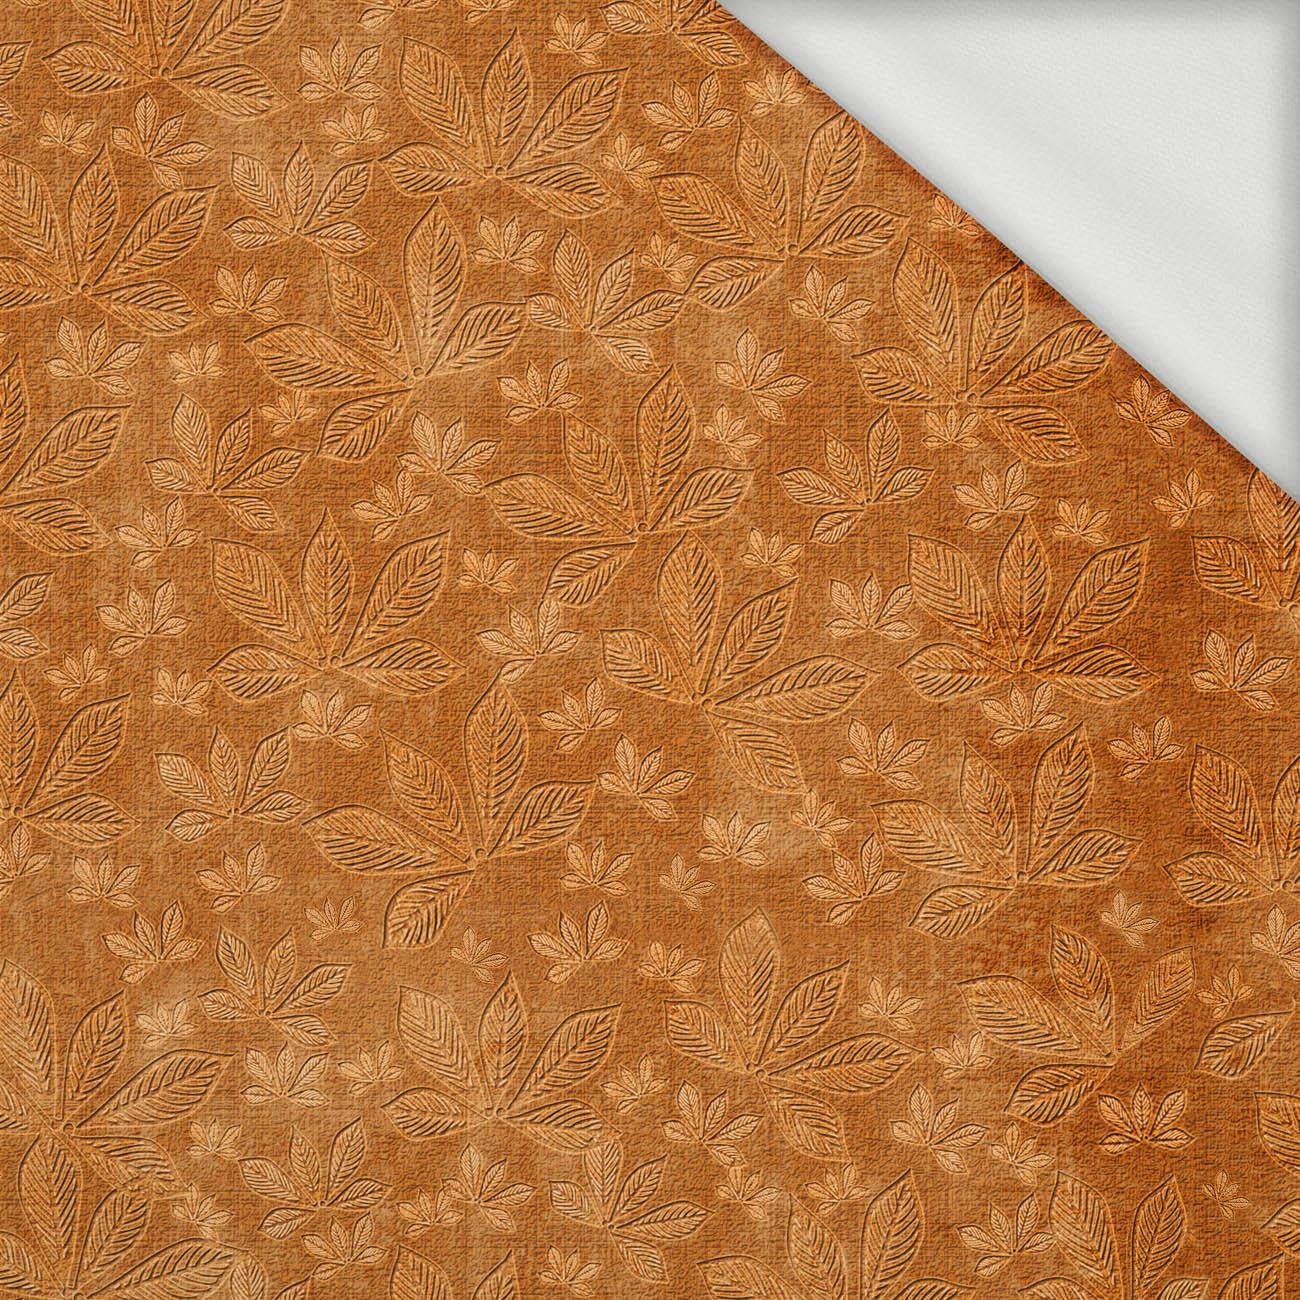 CHESTNUT LEAVES Ms.2 / orange (AUTUMN COLORS) - looped knit fabric